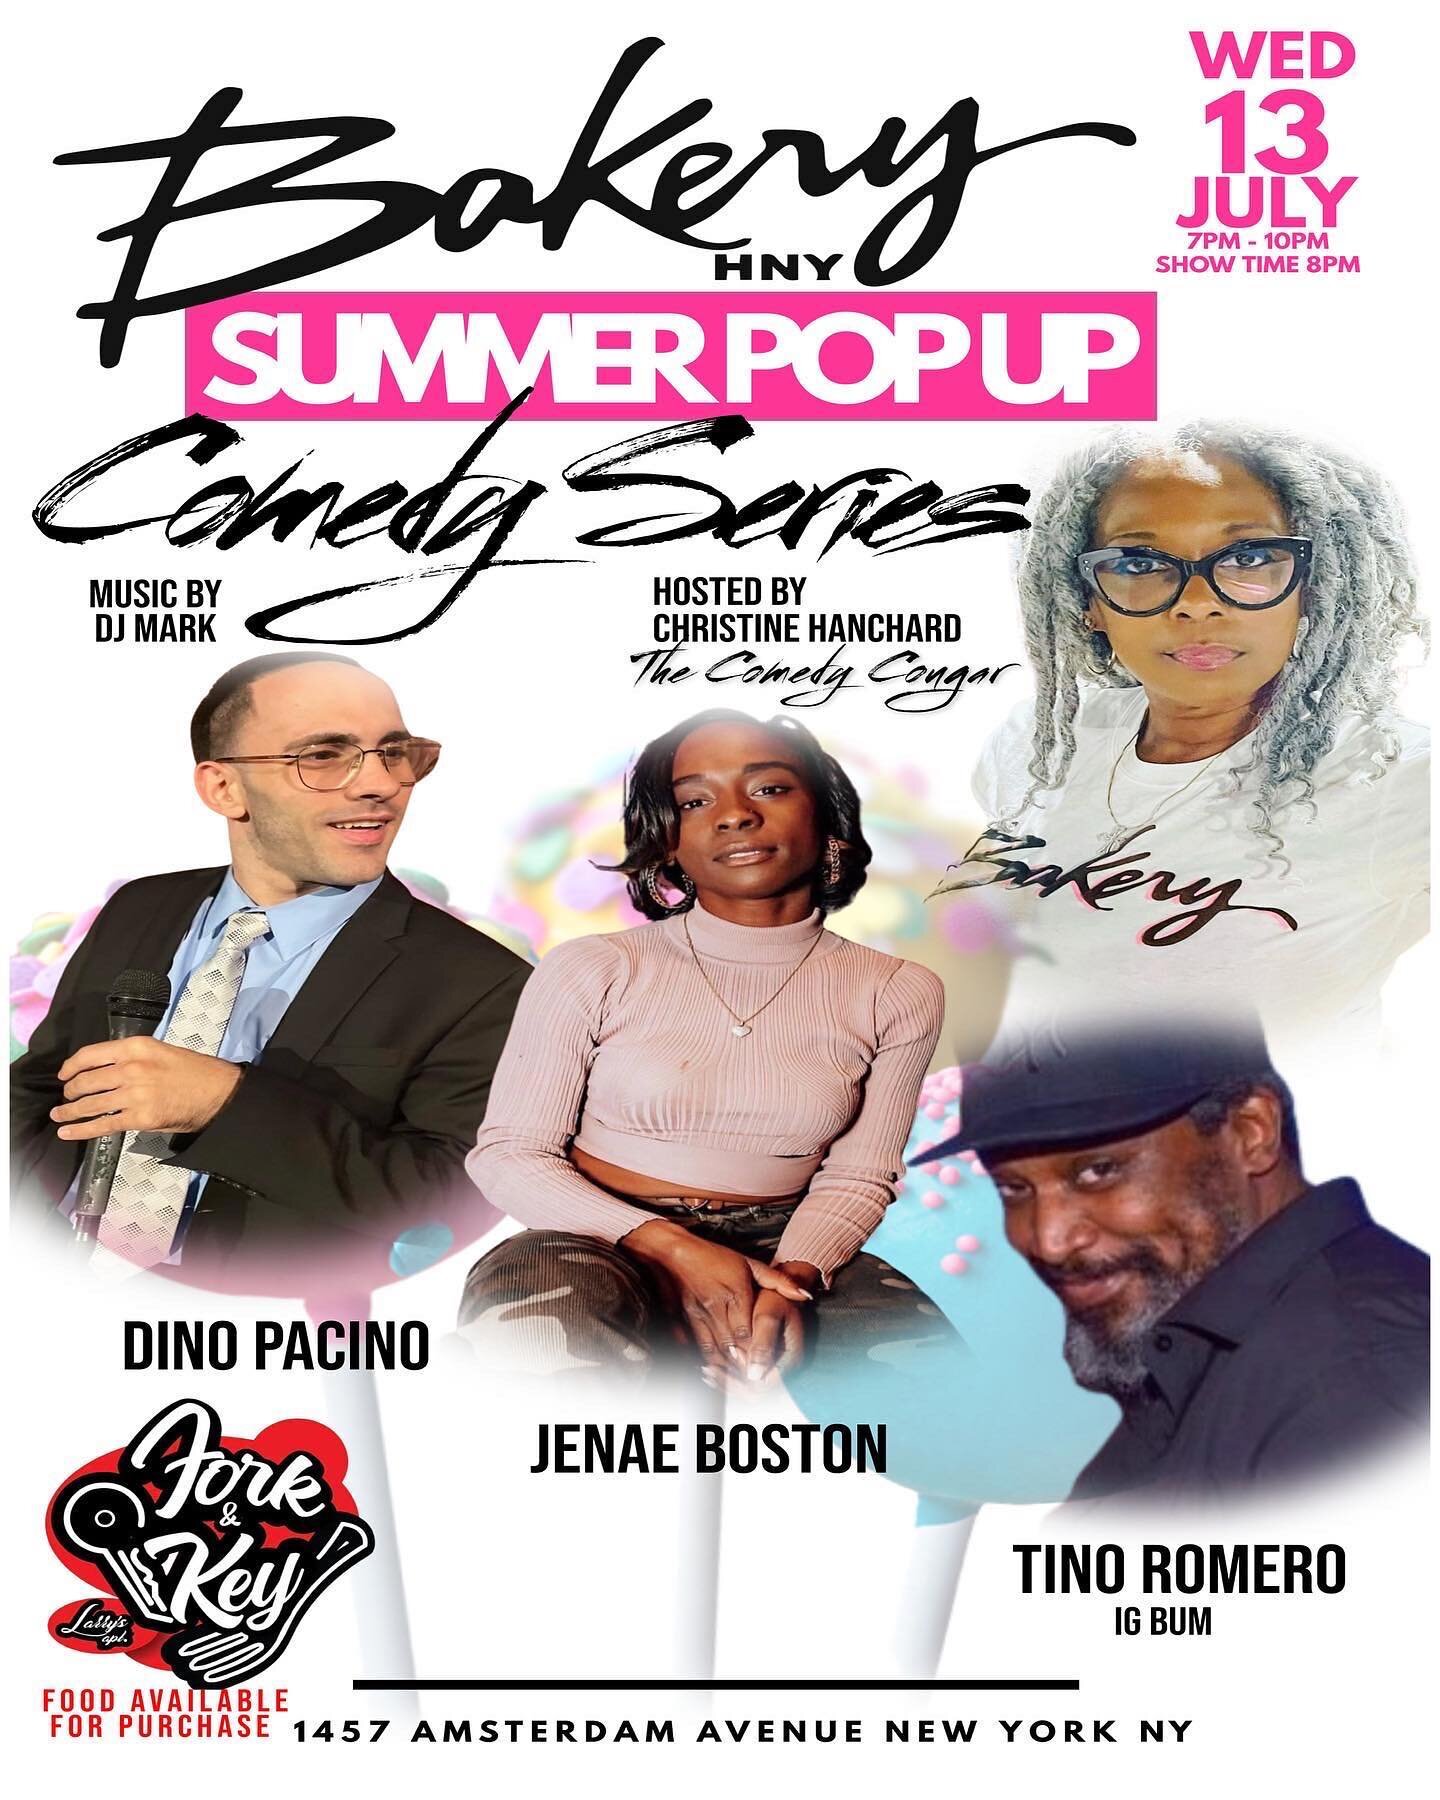 This Wed. July 13th Your truly @christinethecomedycougar will be hosting the Bakery Summer Pop-Up Comedy Series. 
With @dinomakesyoulaugh @thatssojenae @i.g.bum 
Music by @bookdjmark 
Every other Wed. pull up @bakery.hny 7p to browse around the store